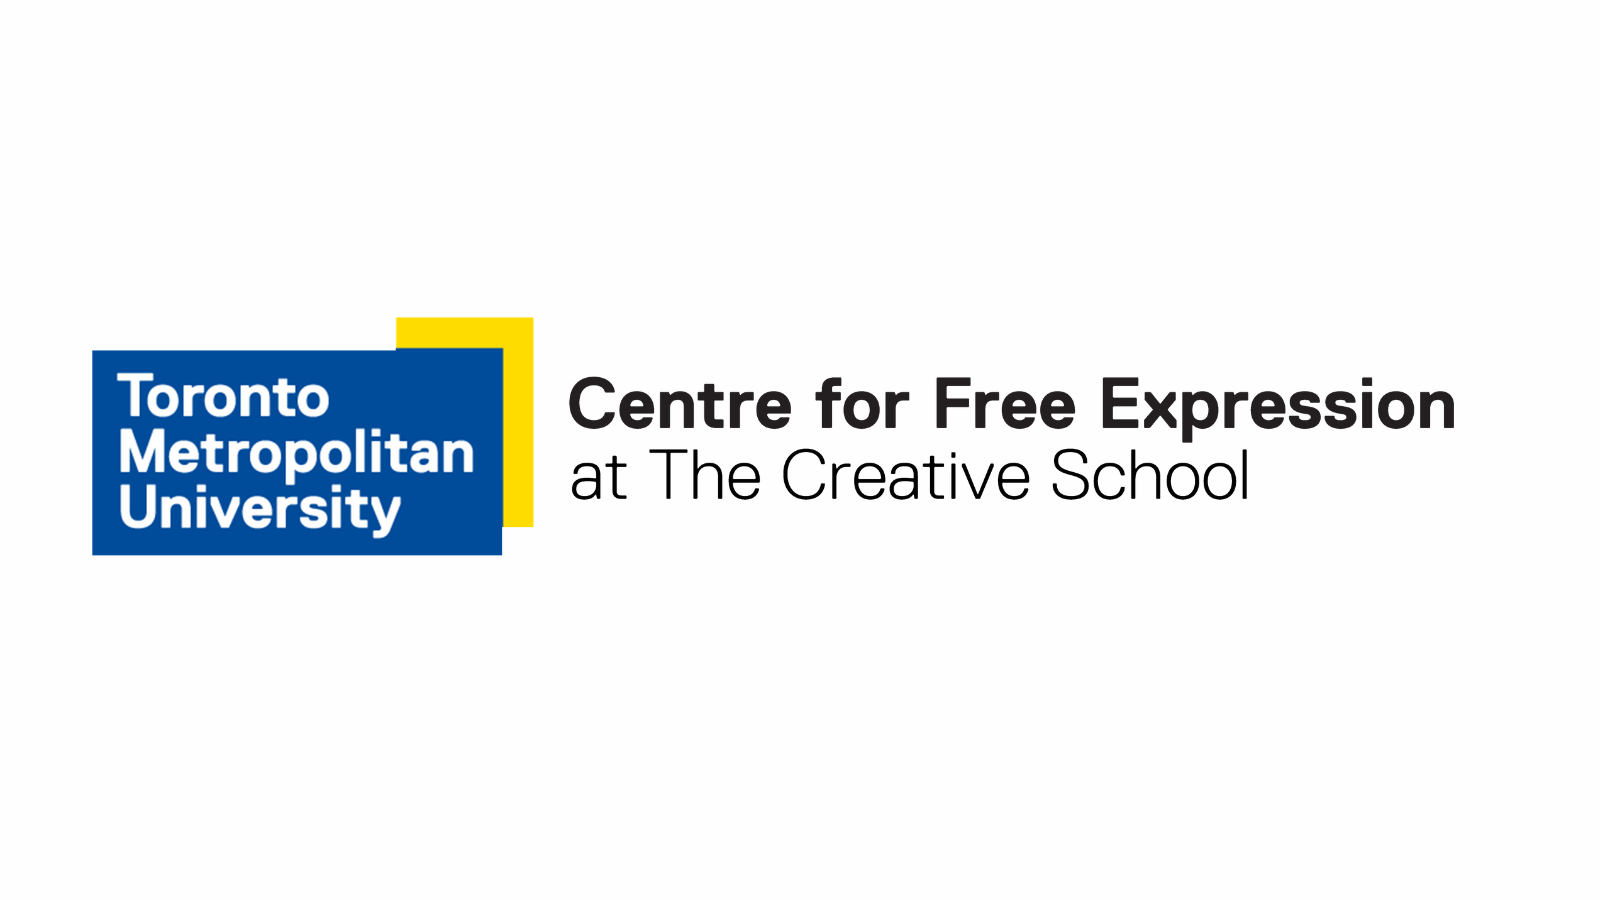 Centre for Free Expression